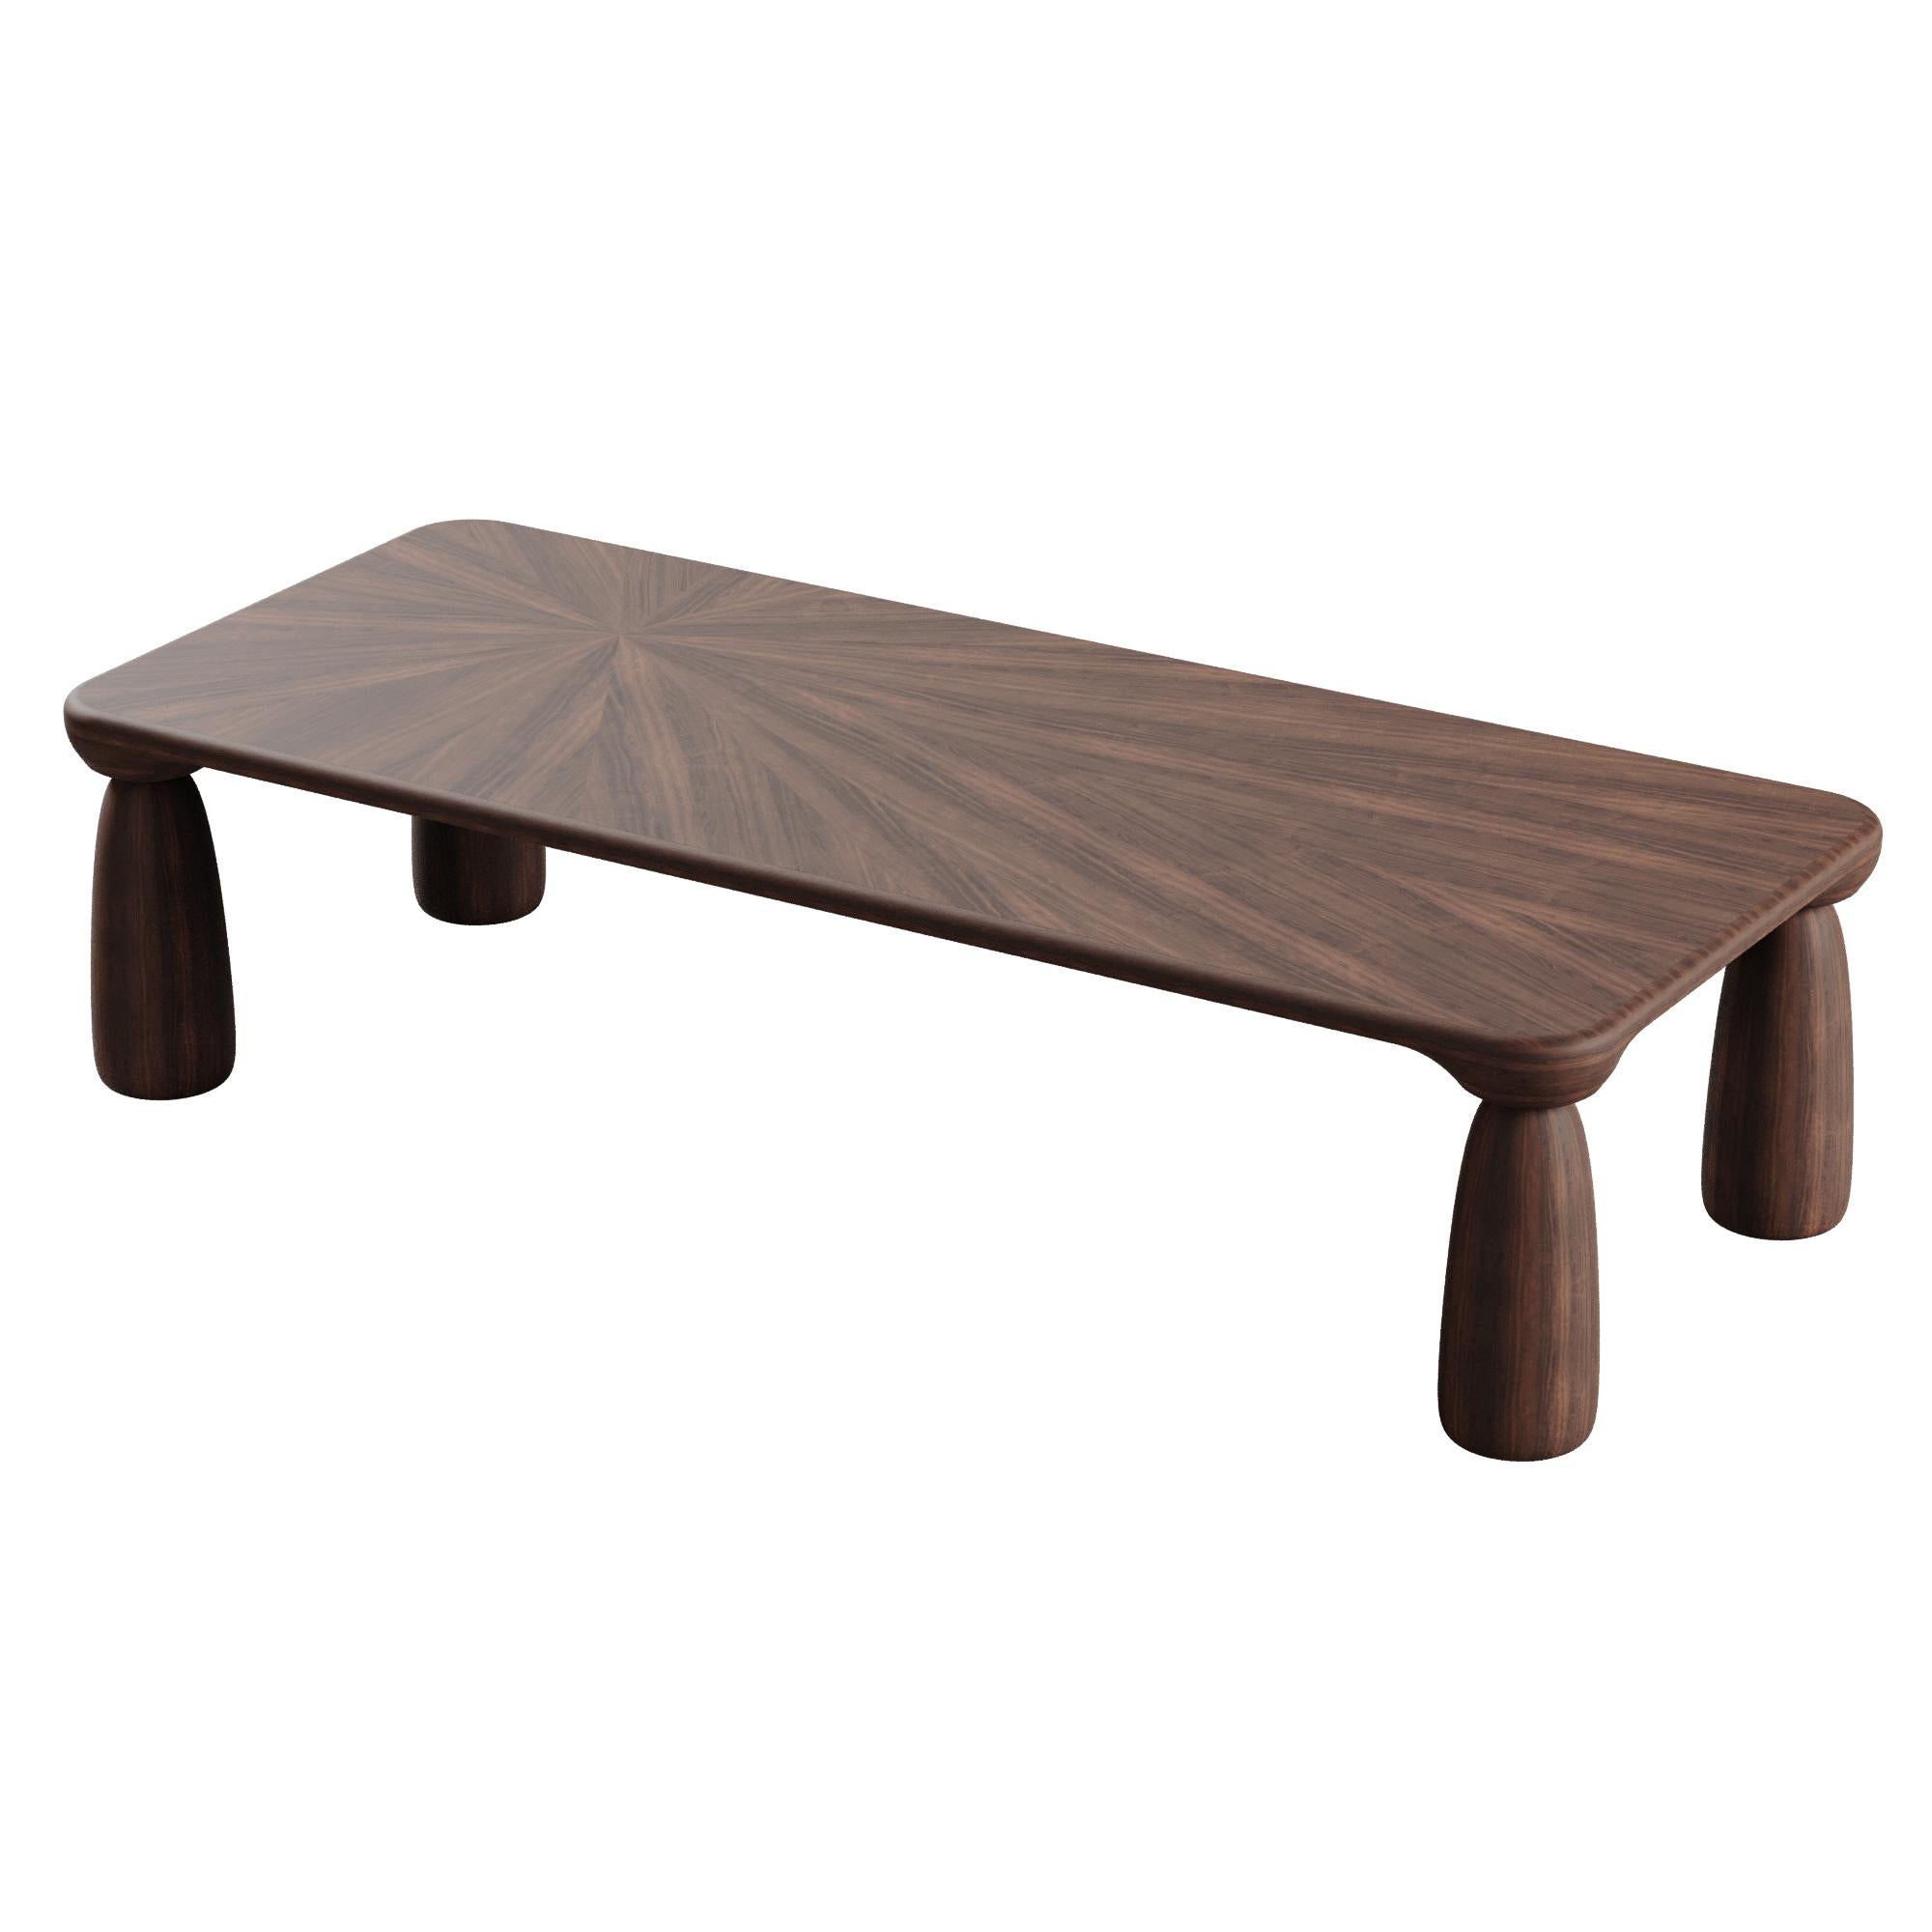 Portuguese 21st Century Mansfield Dining Table Walnut Wood by Wood Tailors Club For Sale